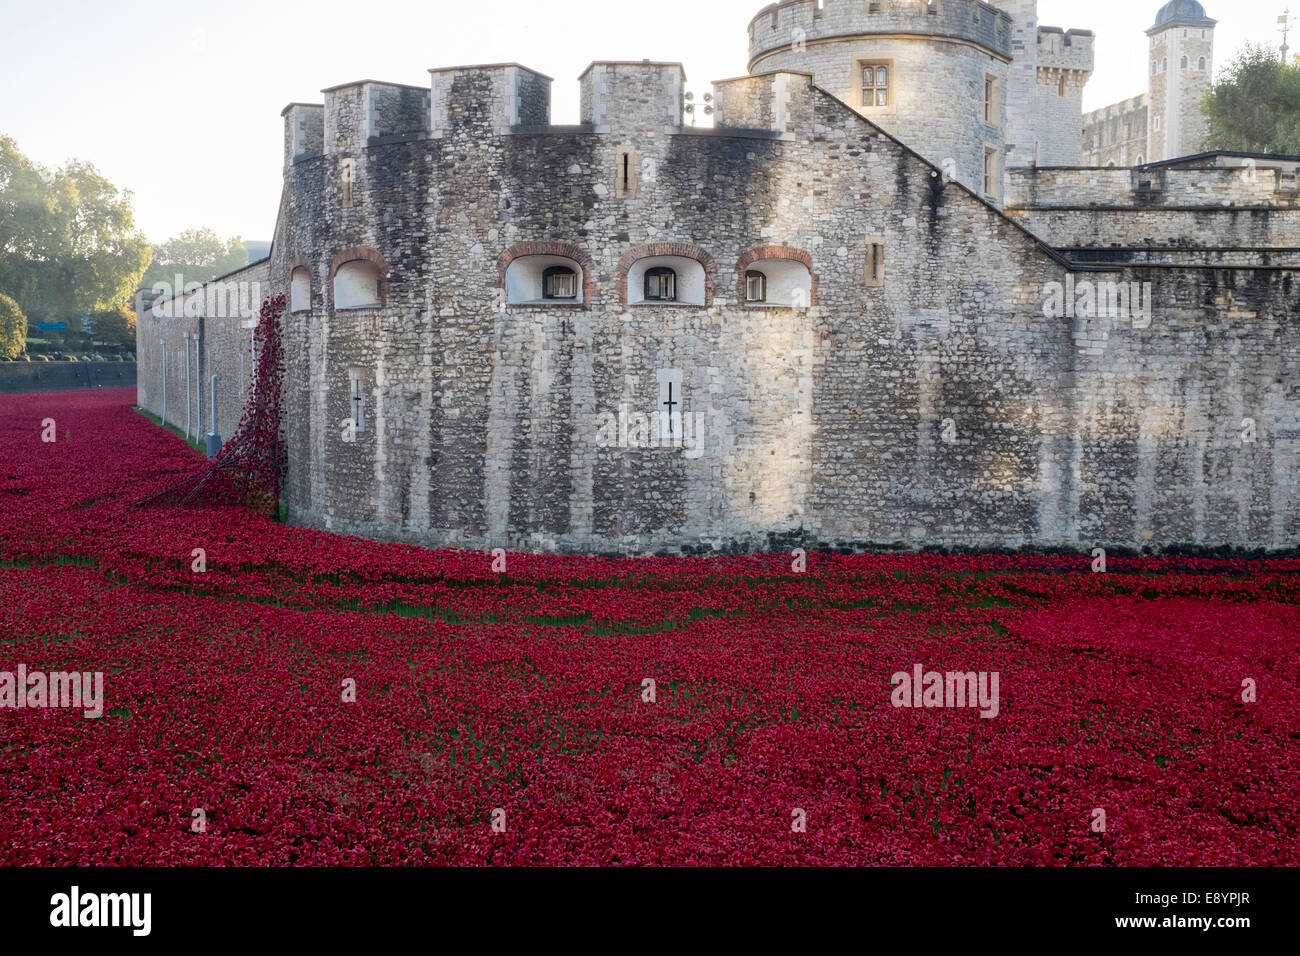 October 2014: "Blood Swept Lands and Seas of Red" by Paul Cummings. Red poppies bleed into the moat at the Tower of London. Stock Photo